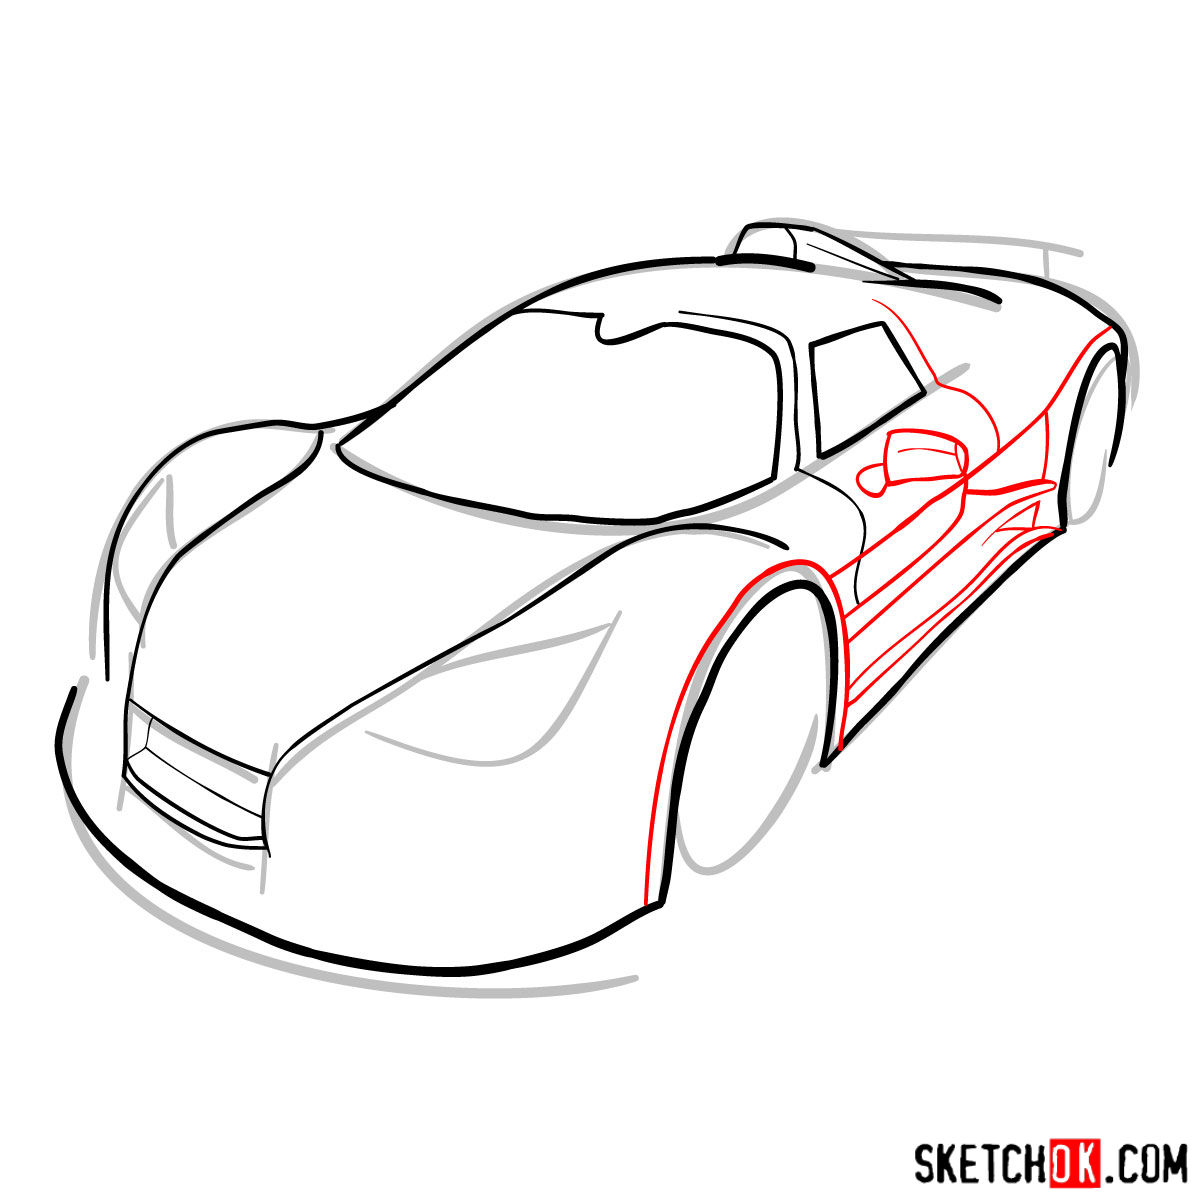 How to draw Gumpert Apolo Sport 2012 - step 07